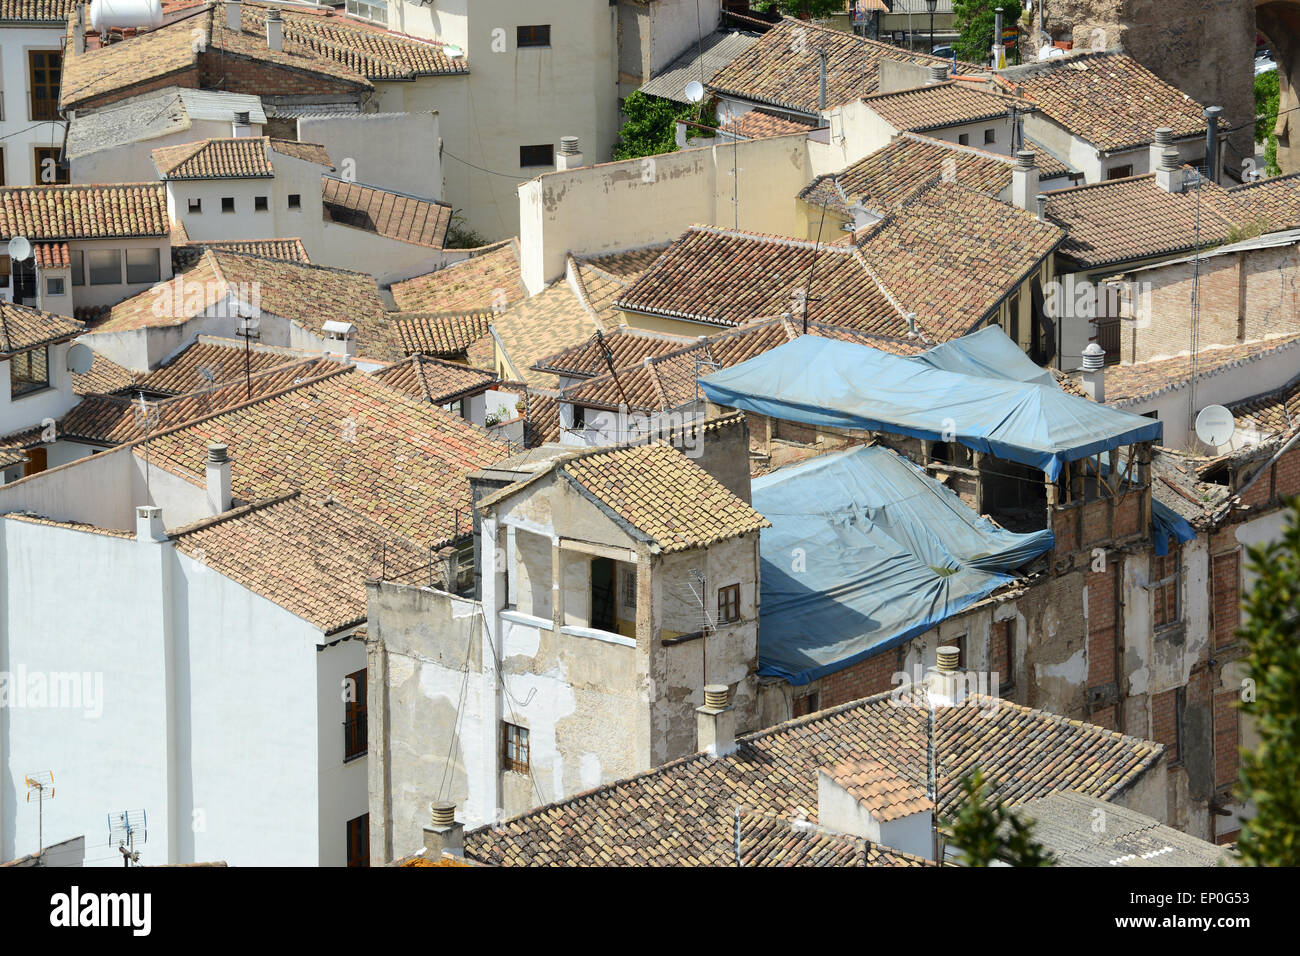 Residential area house houses apartments rooftops Granada Spain Stock Photo